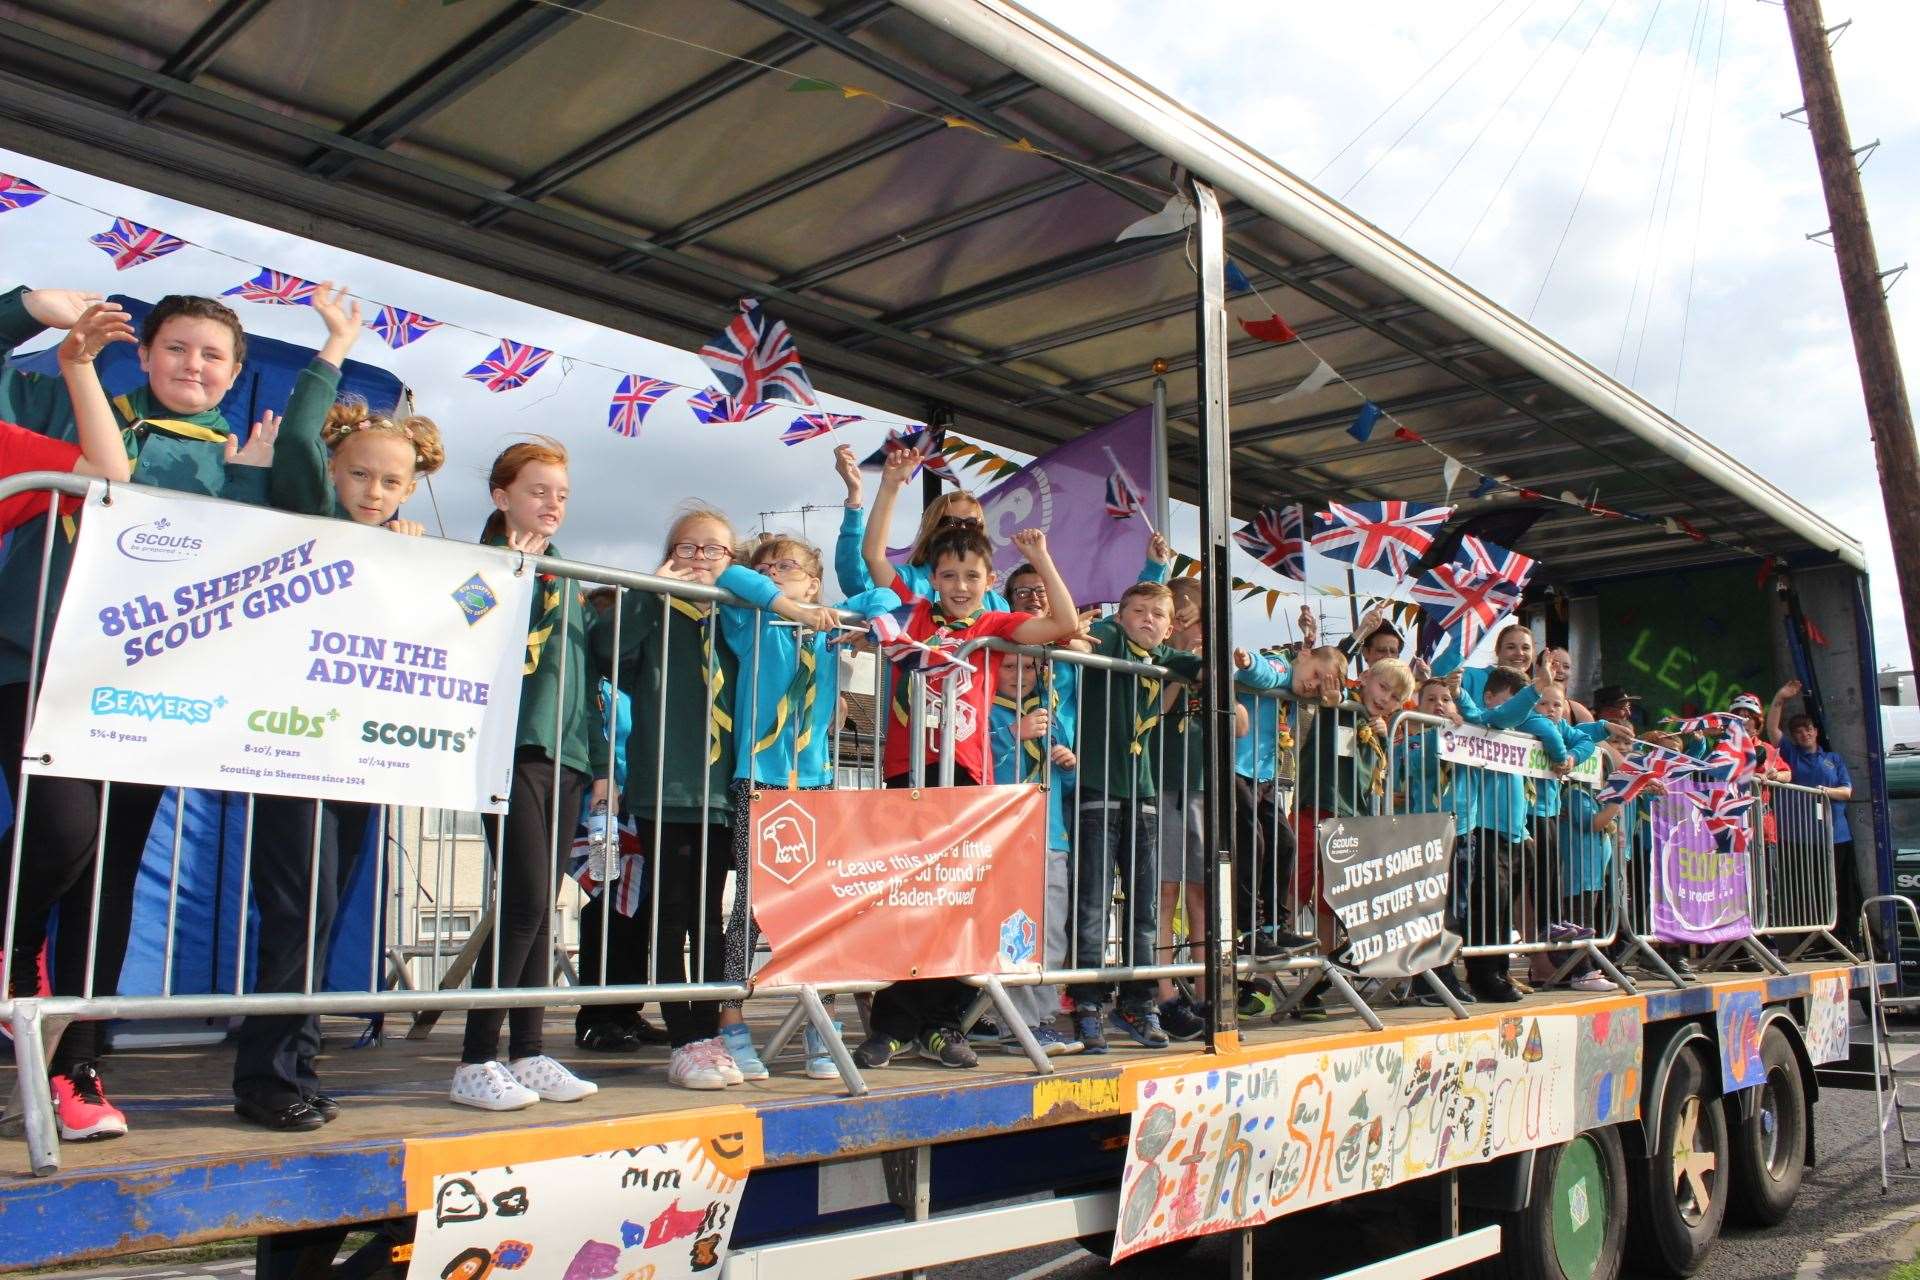 No more lorries for 8th Sheppey Scouts in the Sheppey Summer Carnival (24409506)